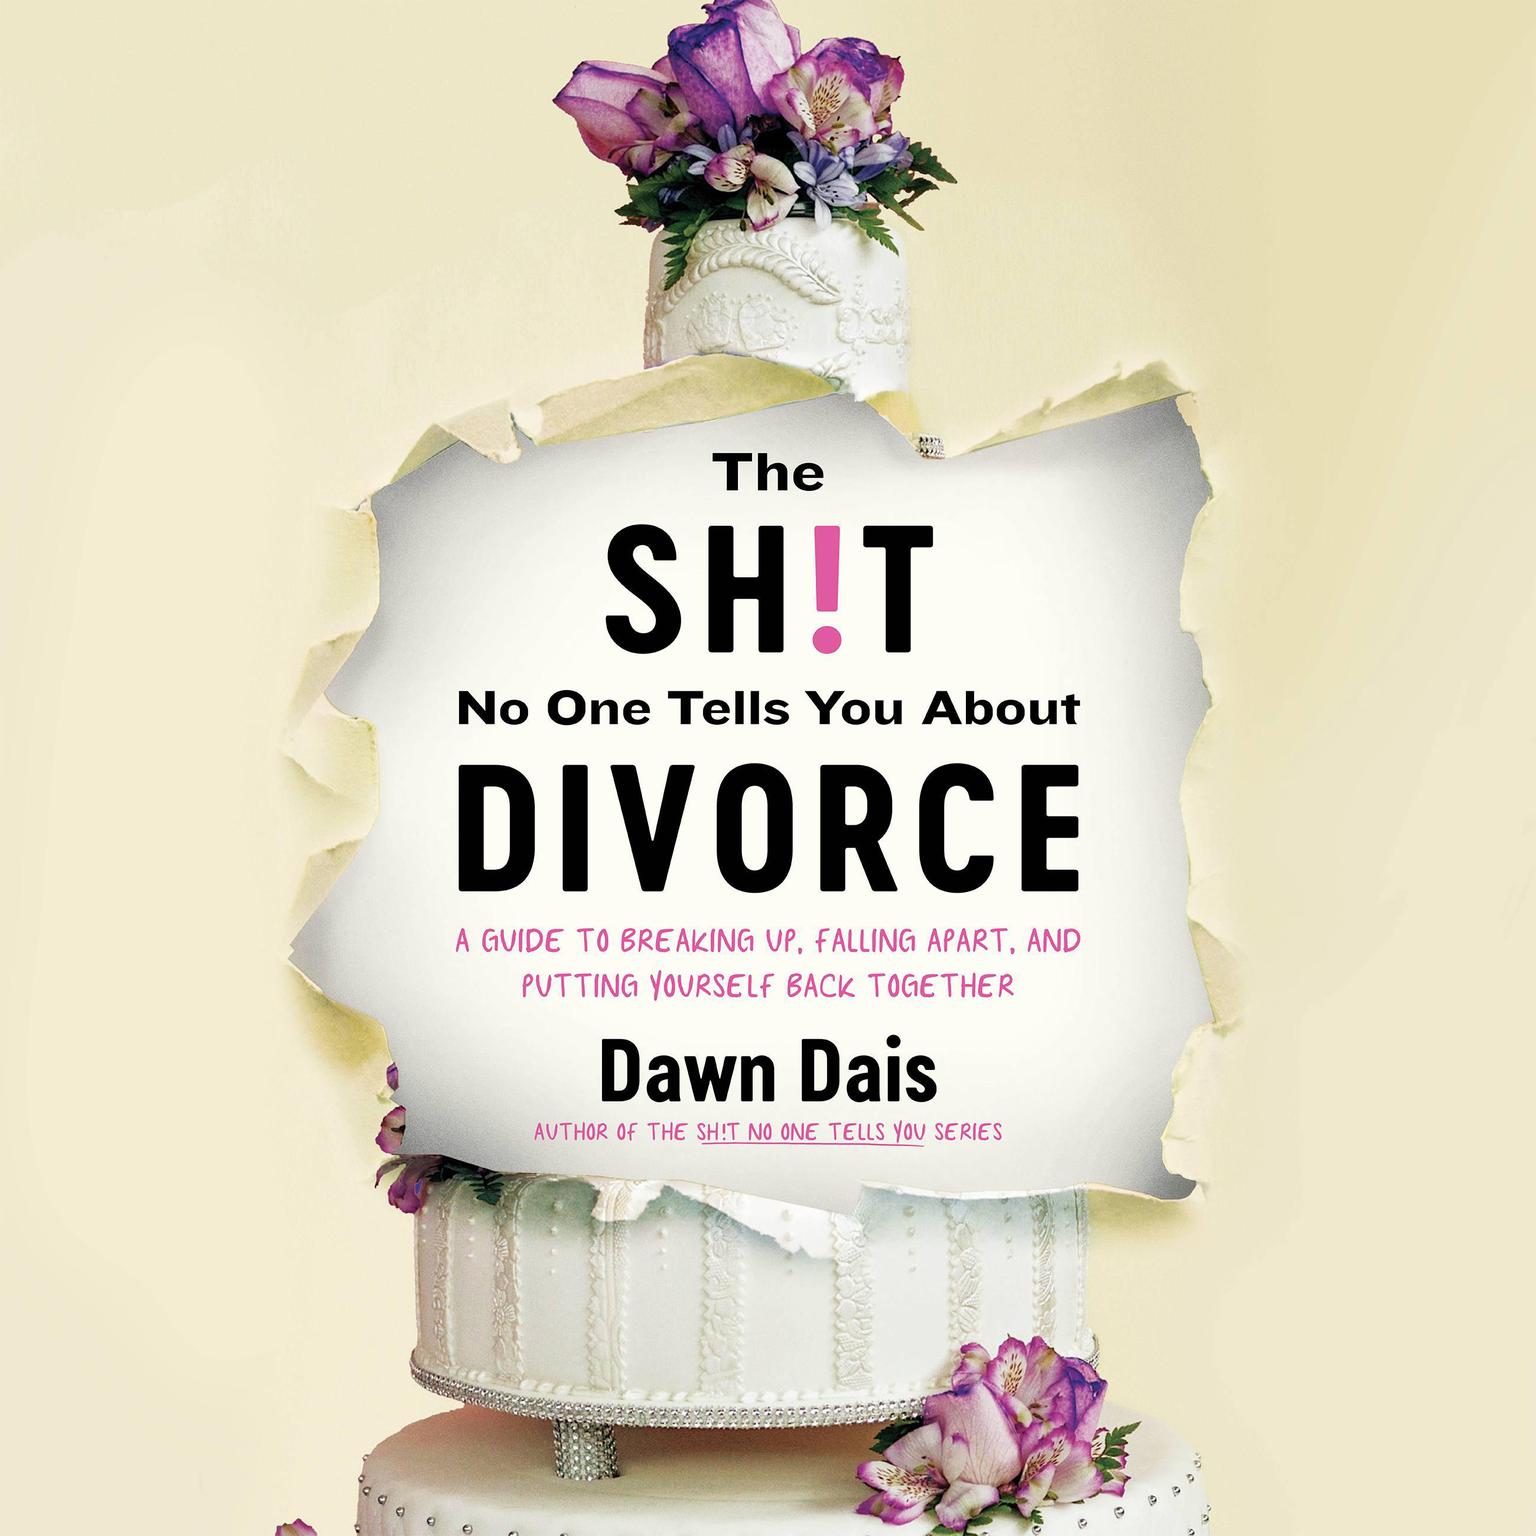 The Sh!t No One Tells You About Divorce: A Guide to Breaking Up, Falling Apart, and Putting Yourself Back Together Audiobook, by Dawn Dais